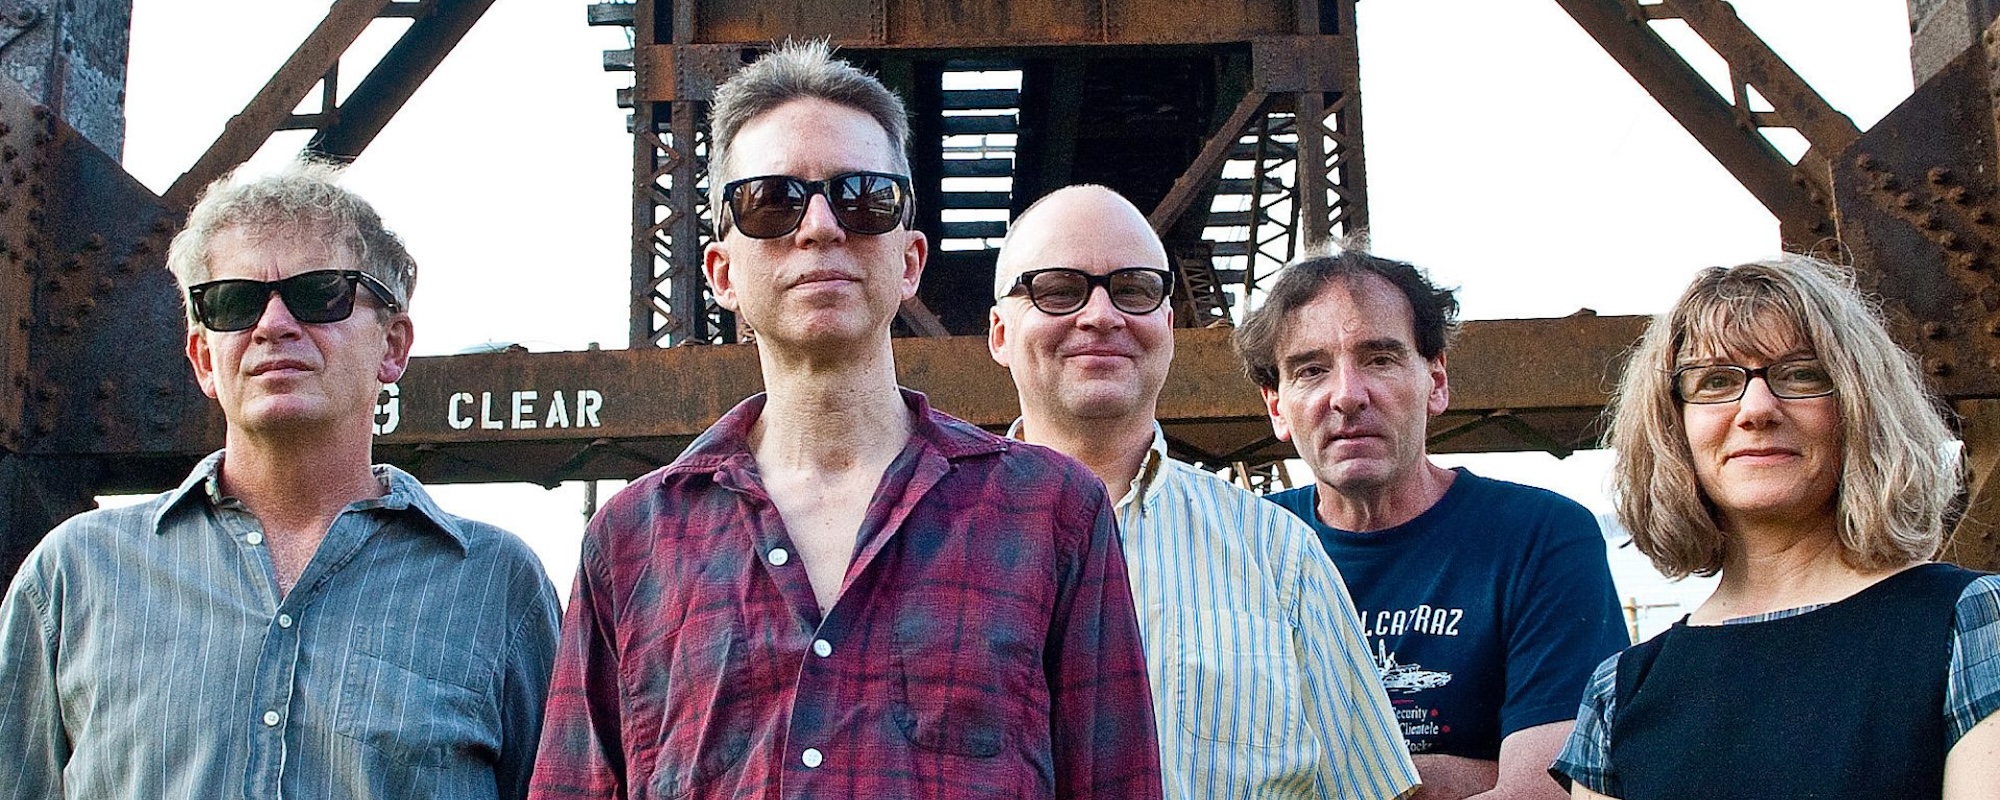 The Feelies’ Glenn Mercer on Showing ‘Some Kind of Love’ Covering the Music of the Velvet Underground, Songwriting, and Returning to The Willies